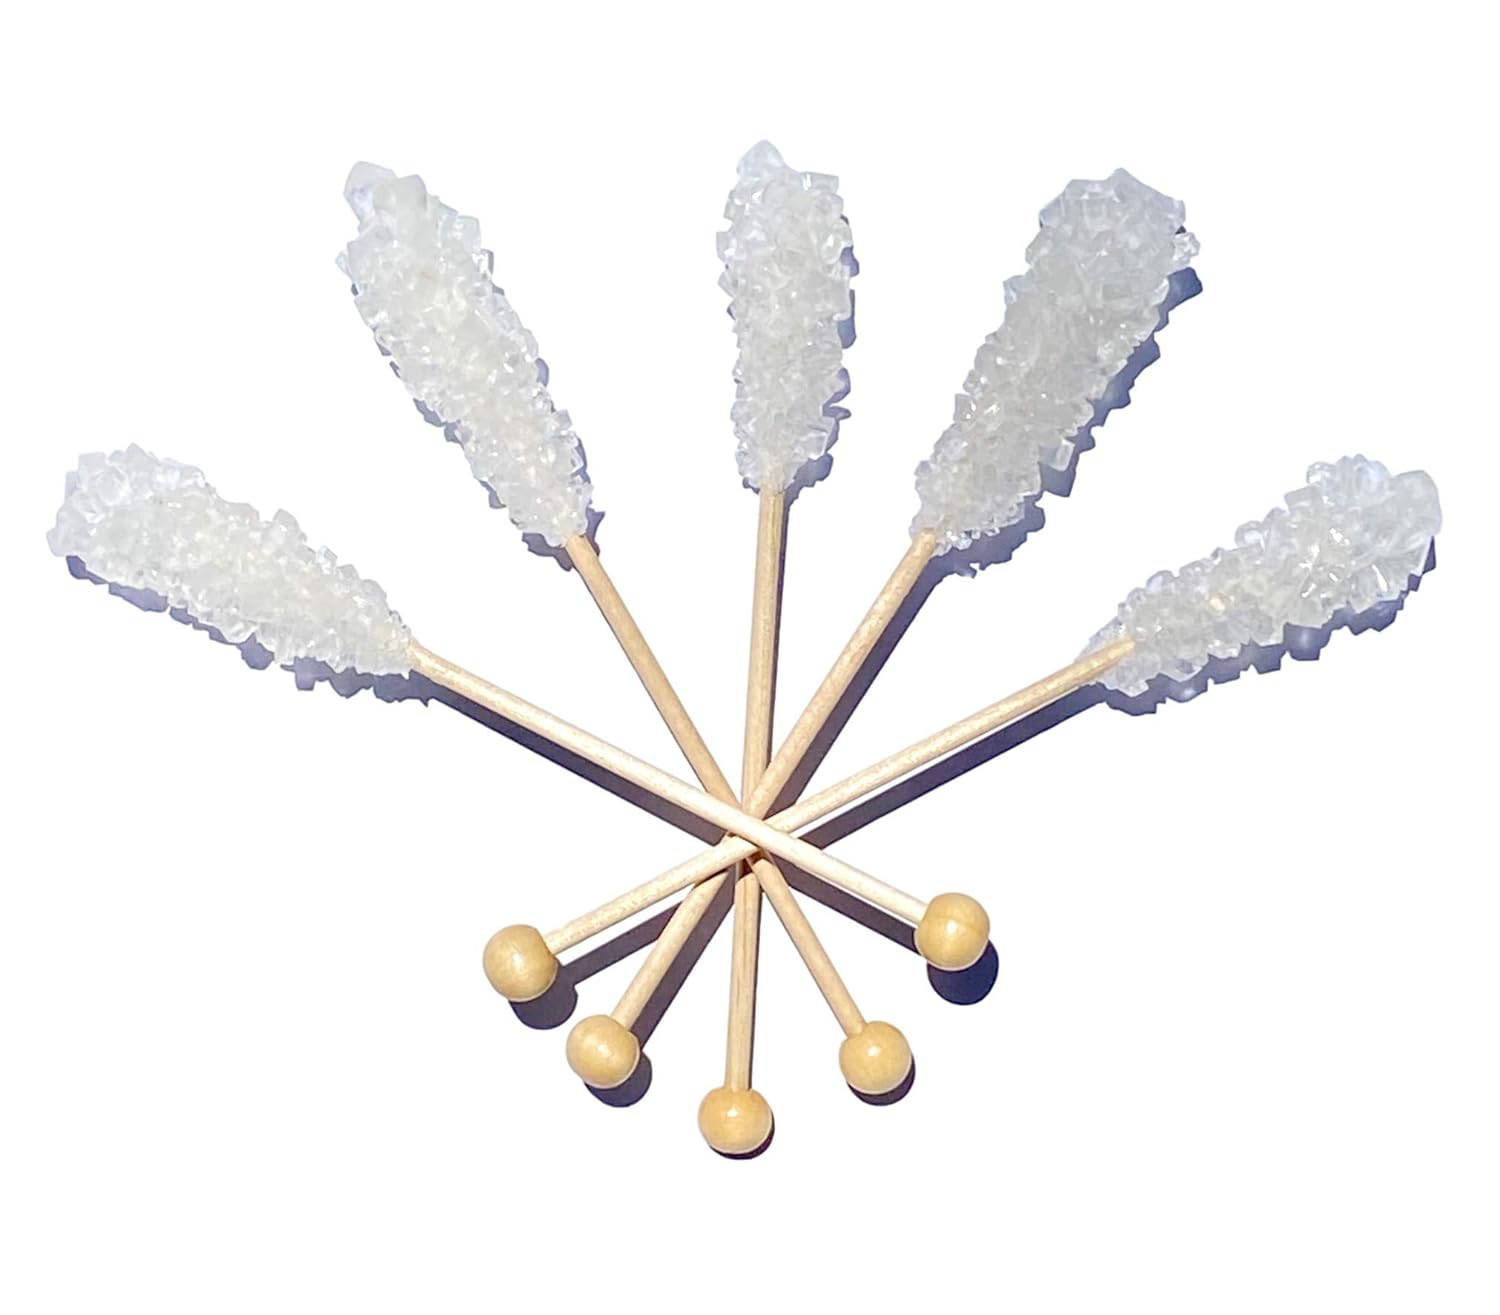  Candy Whisperer Barista Crystal Sticks | 100 Grande White Rock Candy Sticks Individually Wrapped | Gluten Free Rock Sugar Sticks for Tea, Coffee, Matcha and All Your Favorite Bever